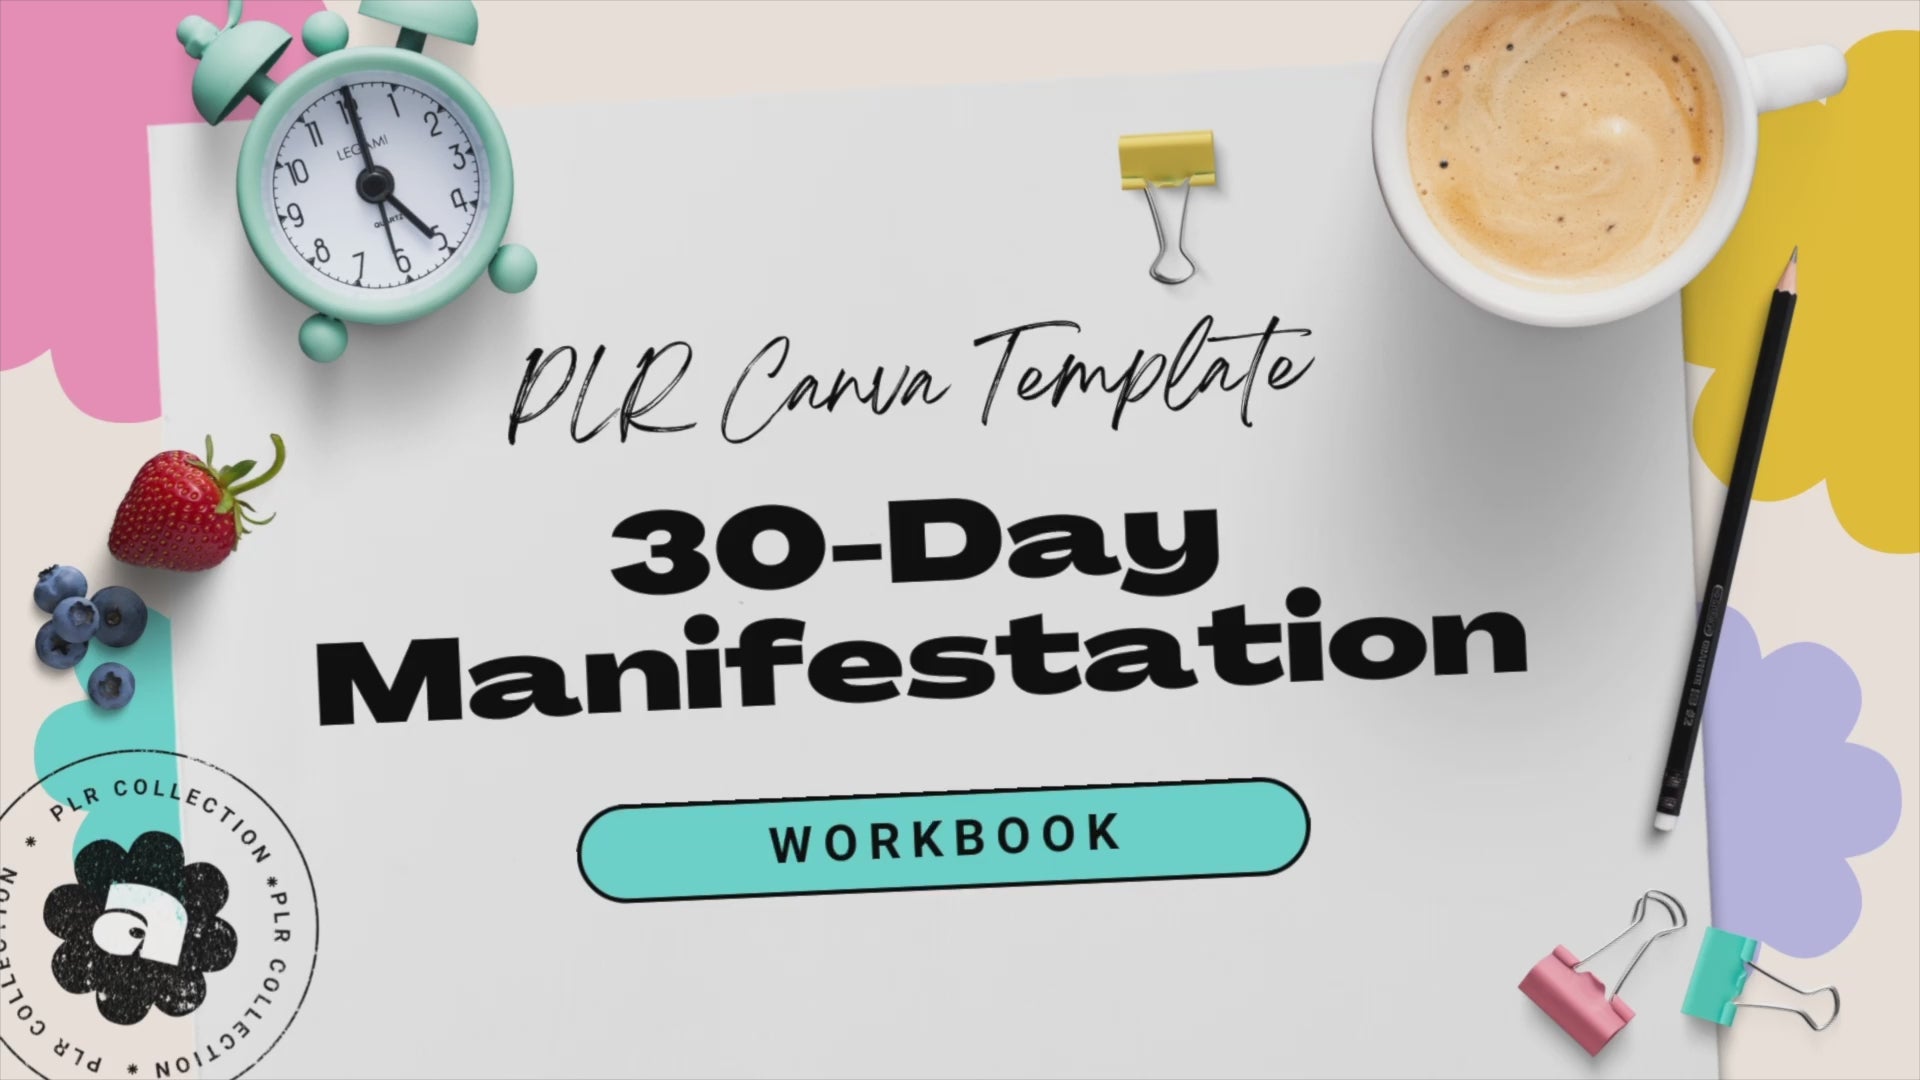 PLR - 30-Day Manifestation Workbook Canva Template (Commercial Use)